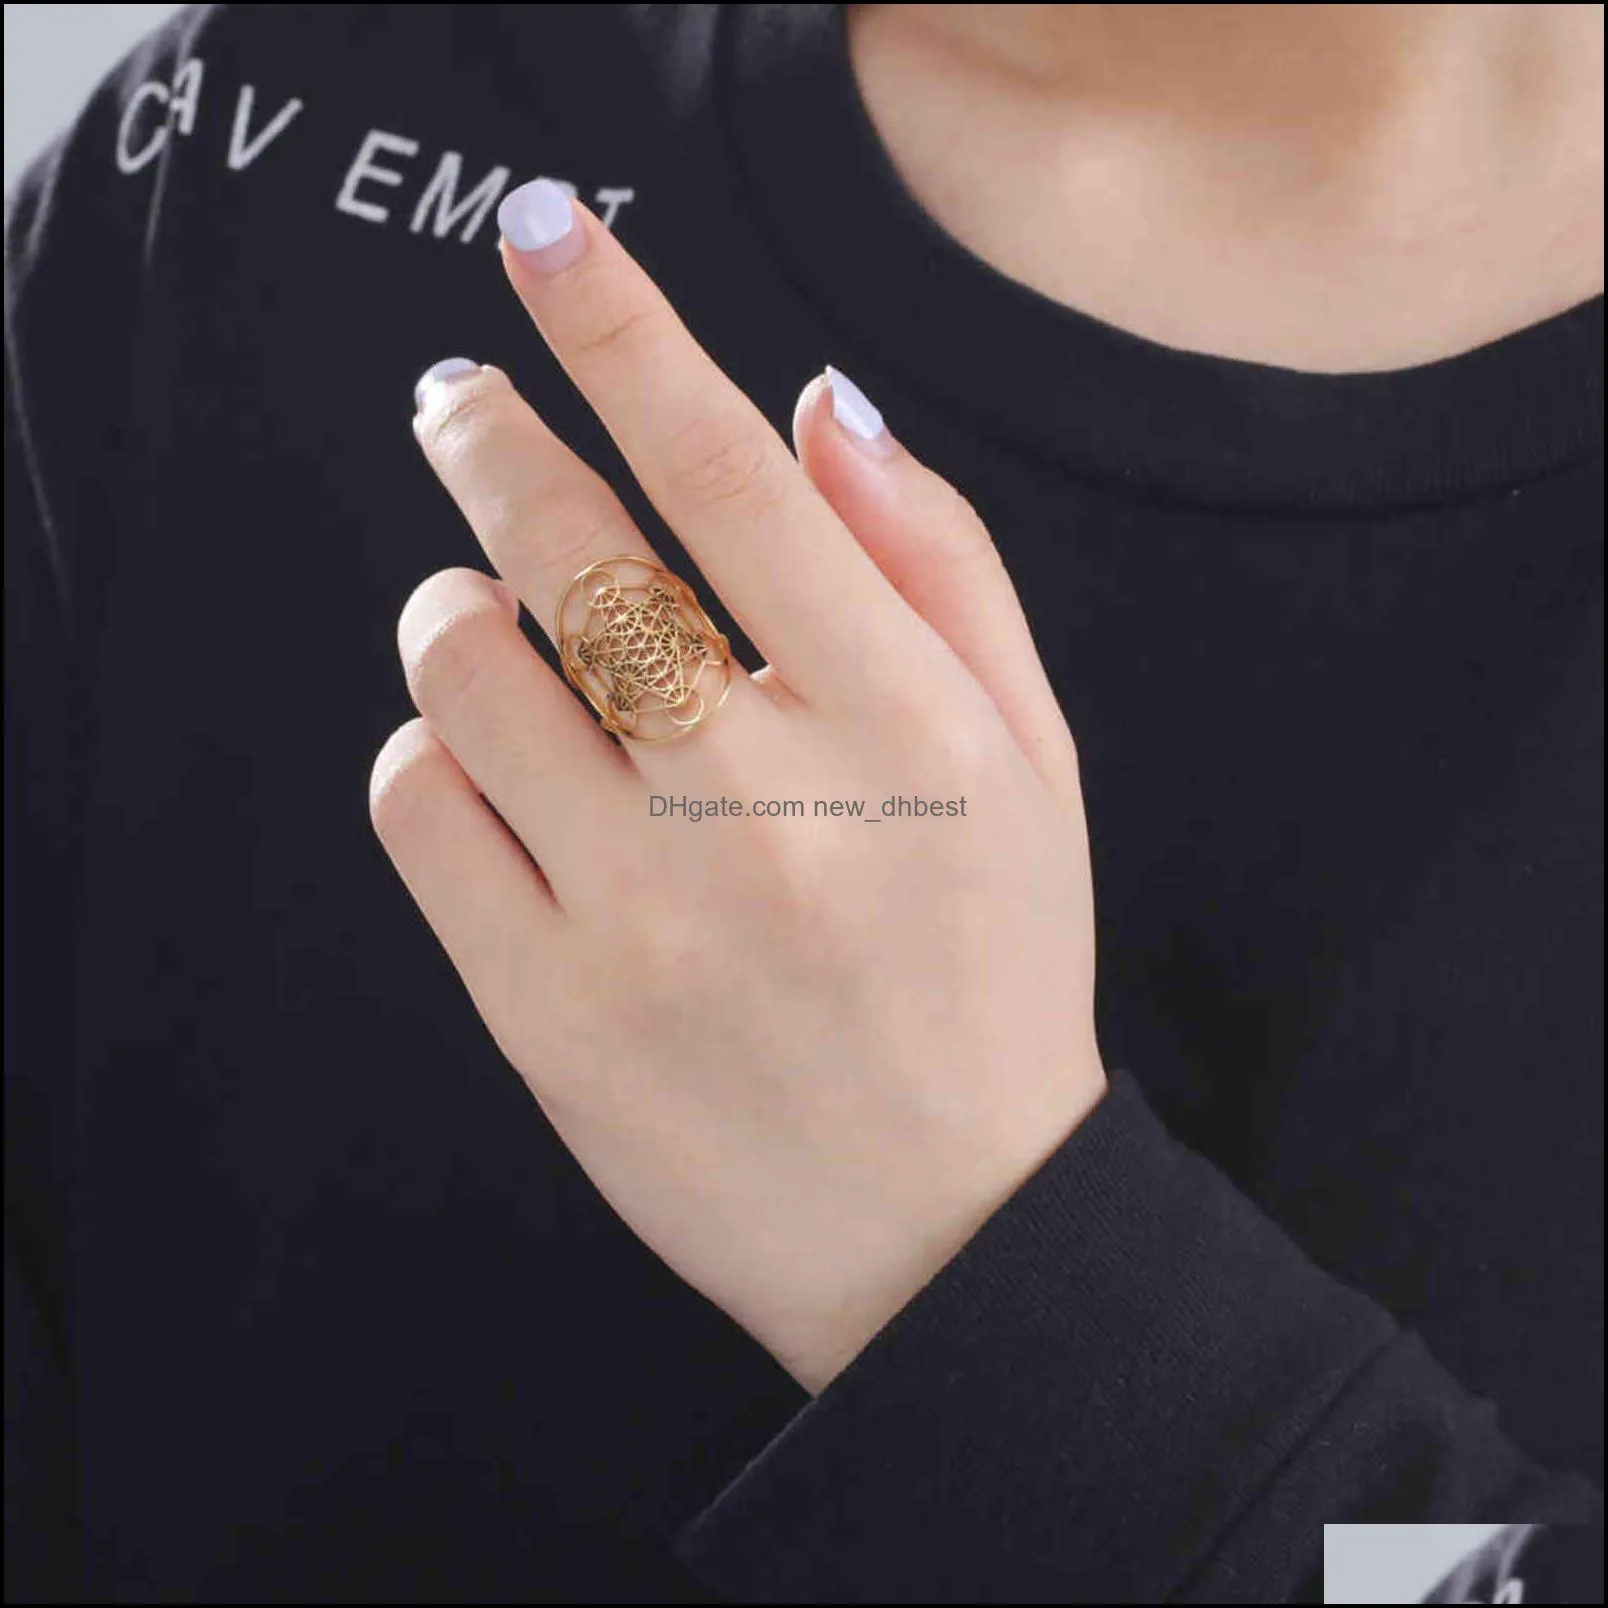 Skyrim Barcelona Flower Square Ring Women Adjustable Stainless Steel Gold  Color Aesthetic Rings Fashion Wedding Jewelry Gift - AliExpress